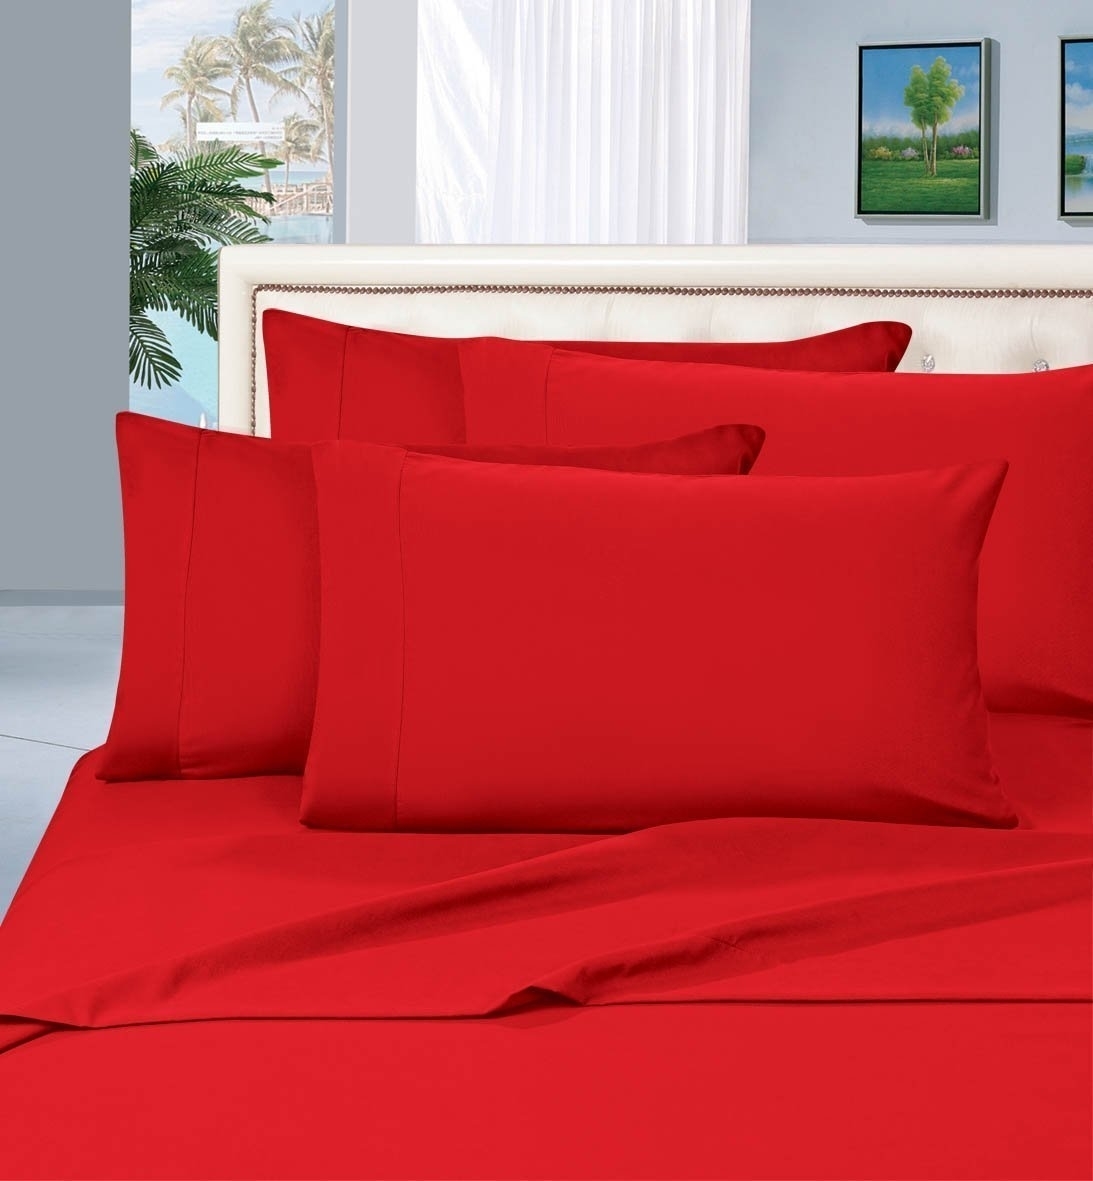 Elegant Comfort 1500 Series Wrinkle Resistant Egyptian Quality Hypoallergenic Ultra Soft Luxury 4-piece Bed Sheet Set, King, Red